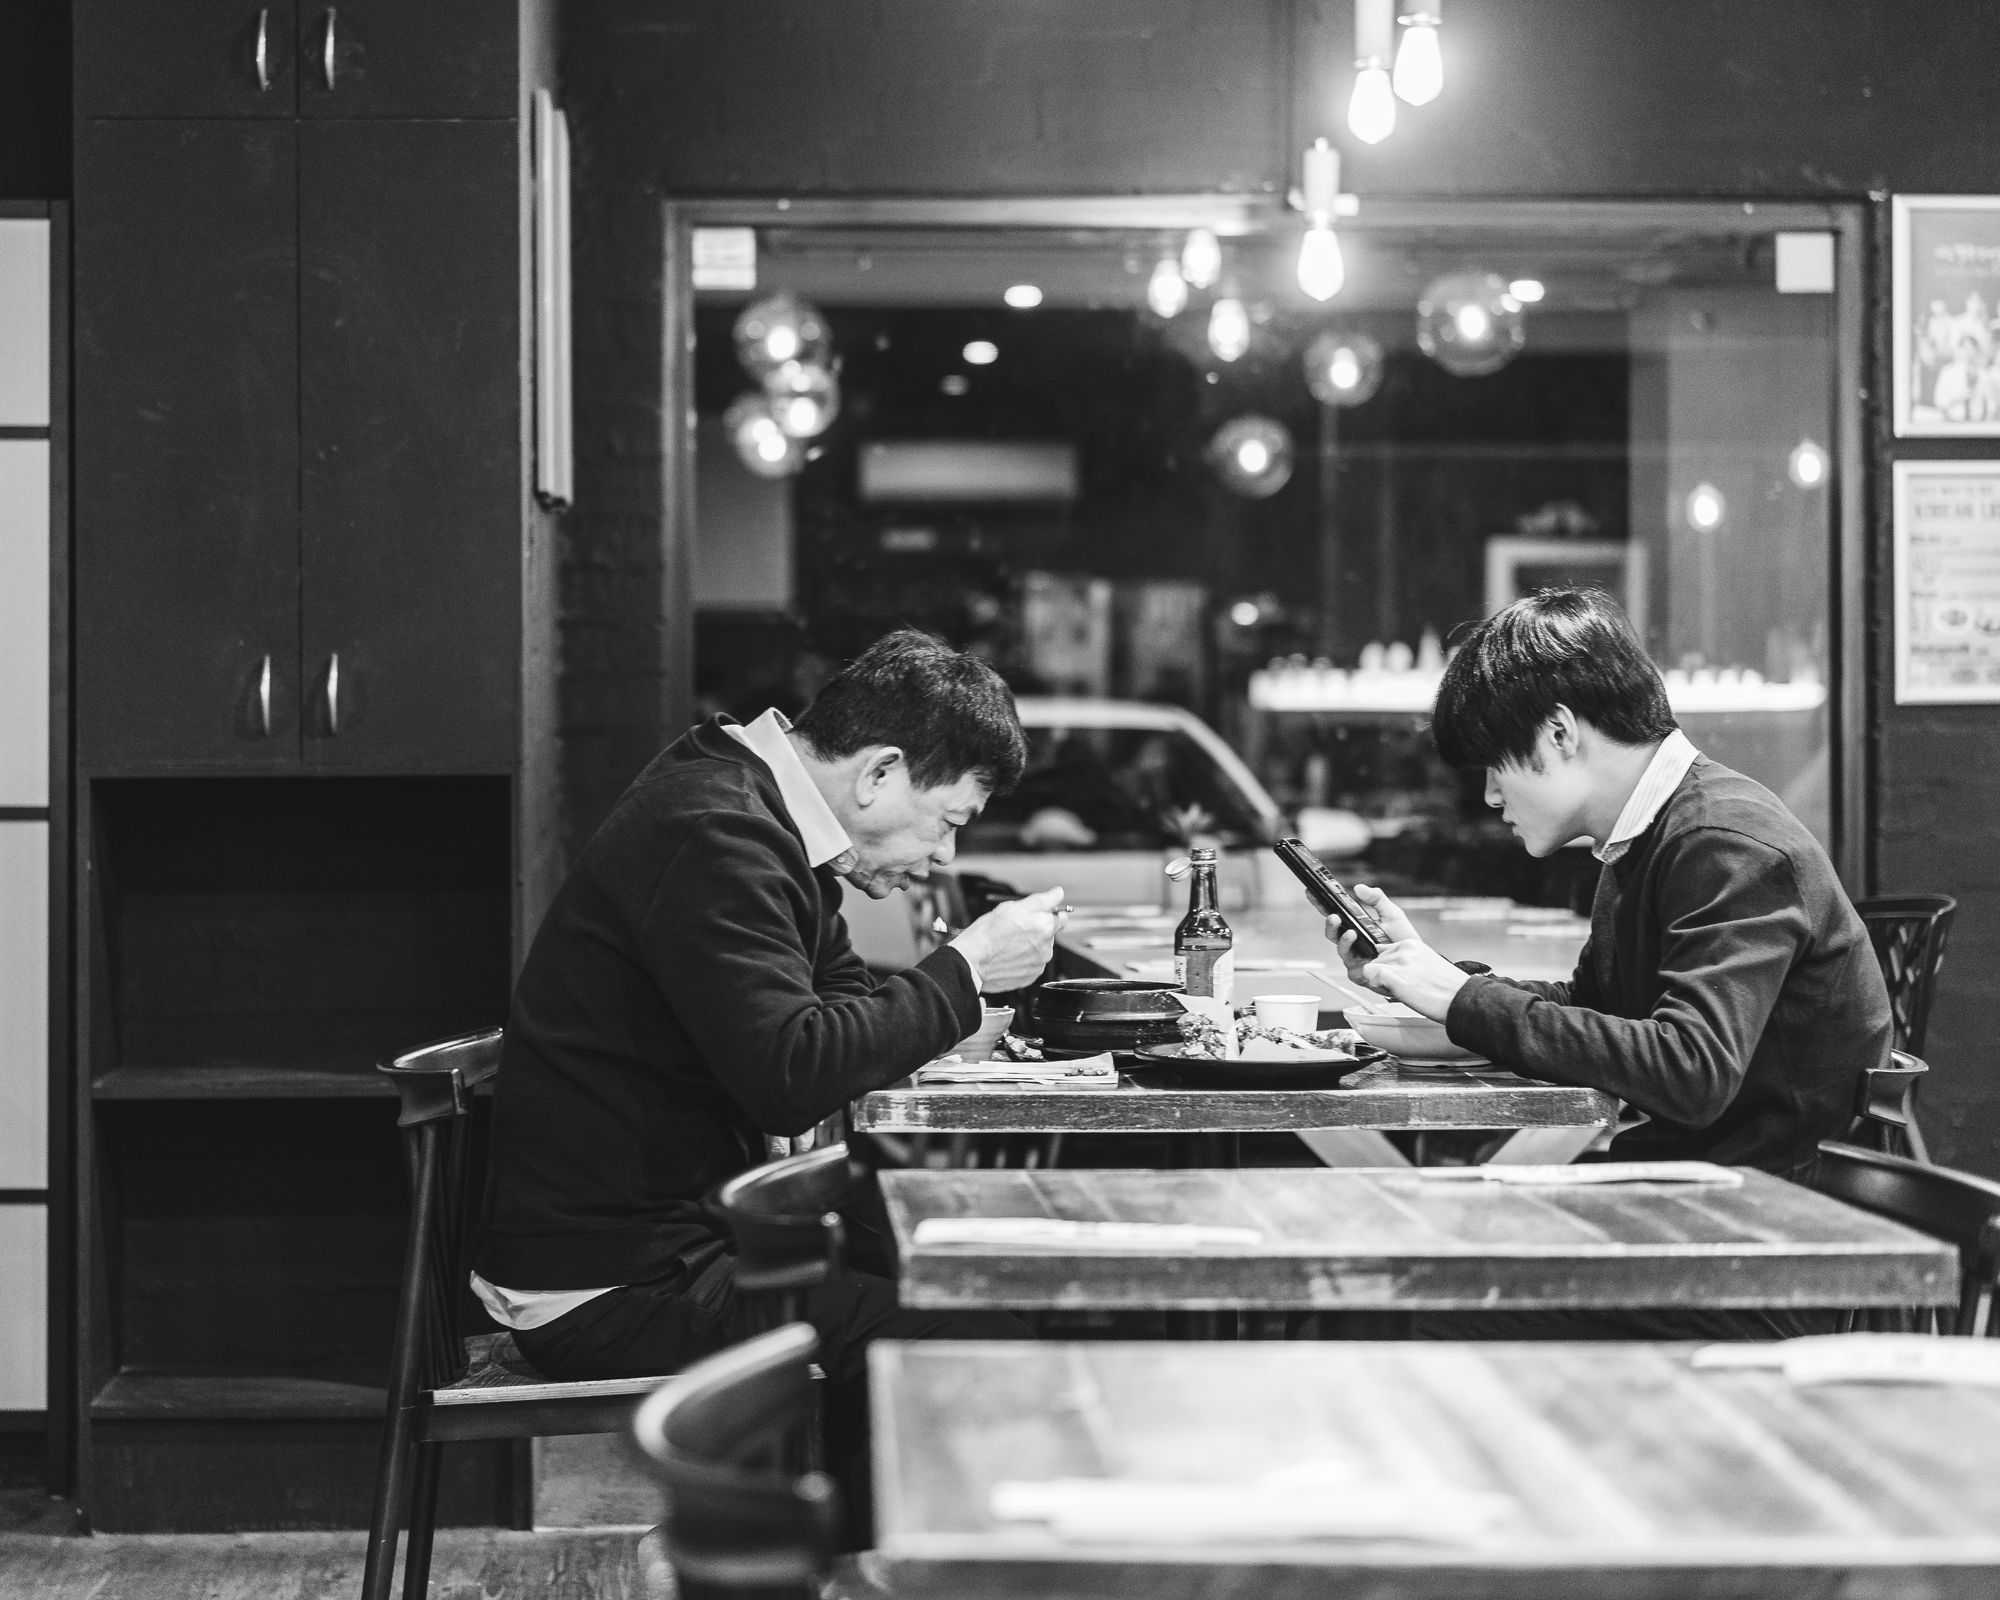 Black and white photo of wwo men eating food in a restaurant